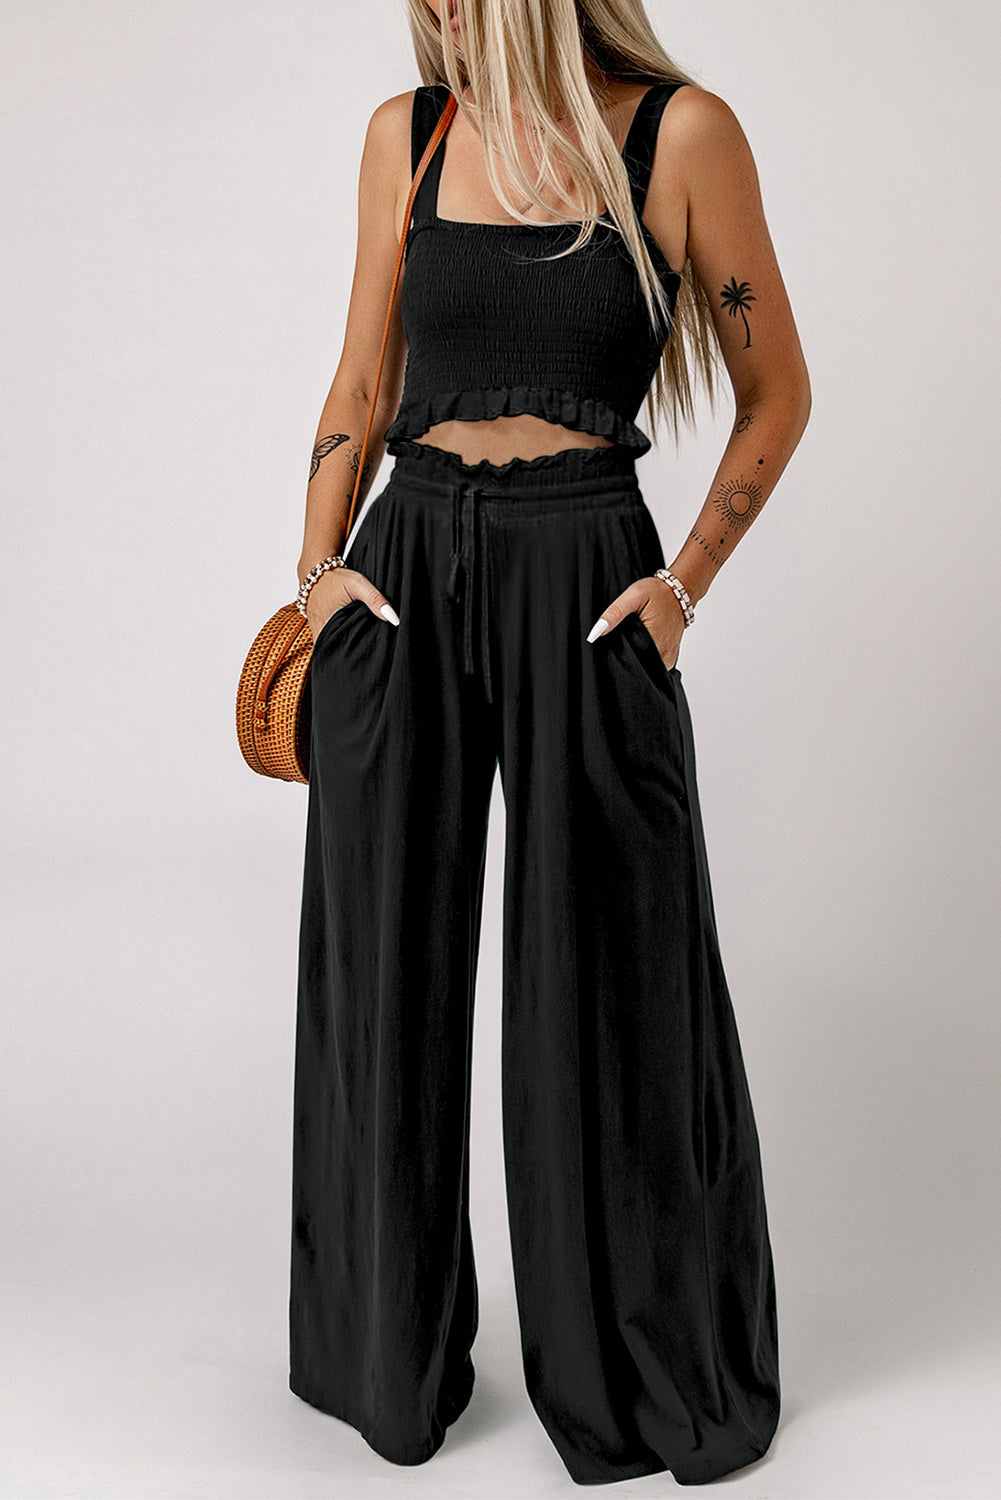 Square Neck Cropped Tank Top and Long Pants Set - Black / S Wynter 4 All Seasons